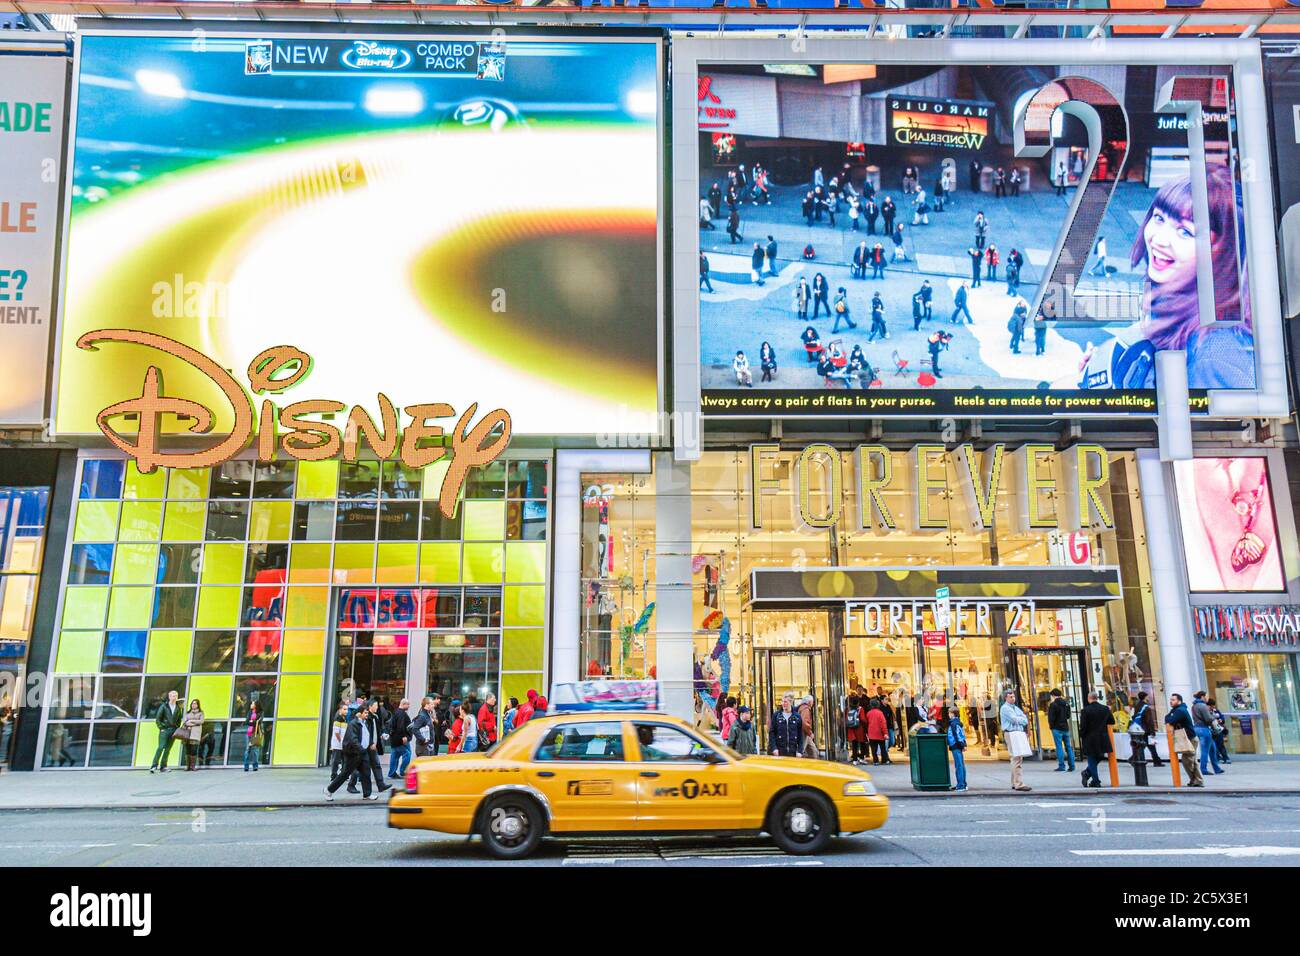 Forever 21 Store In Times Square Nyc Stock Photo - Download Image Now -  Disney Store, Times Square - Manhattan, Forever 21 - iStock